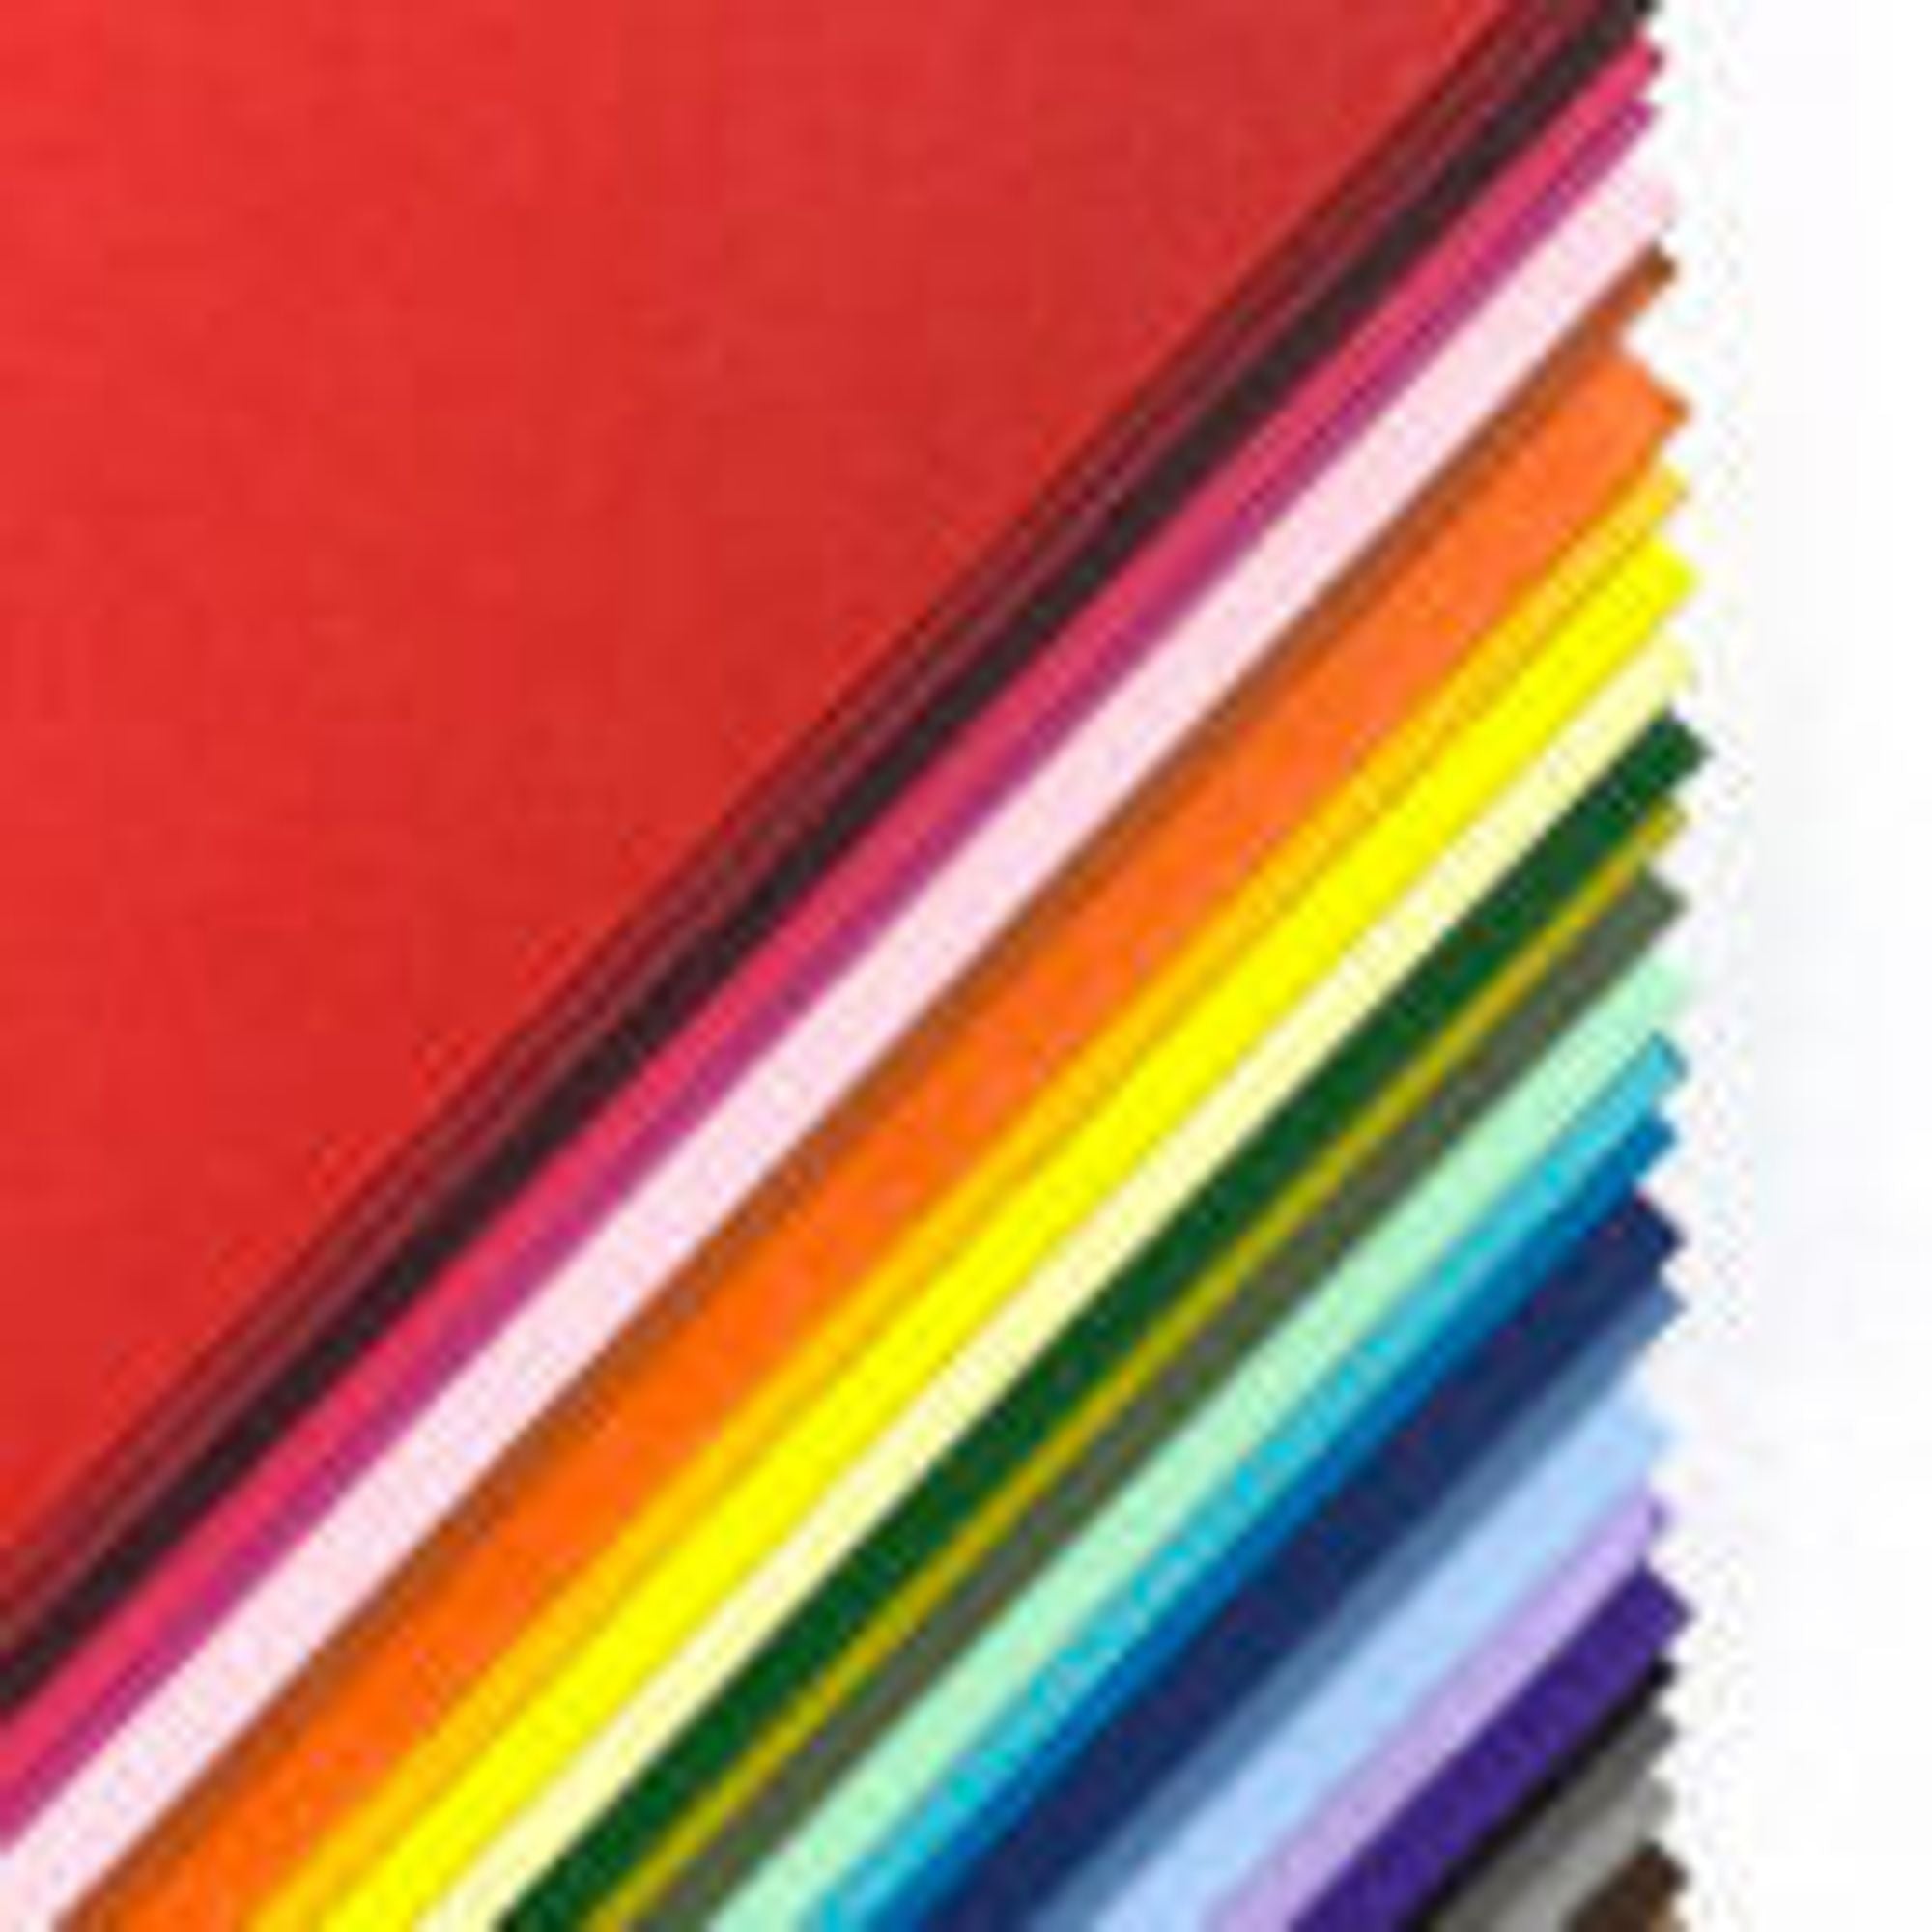 a3 cardstock paper, a3 cardstock paper Suppliers and Manufacturers at